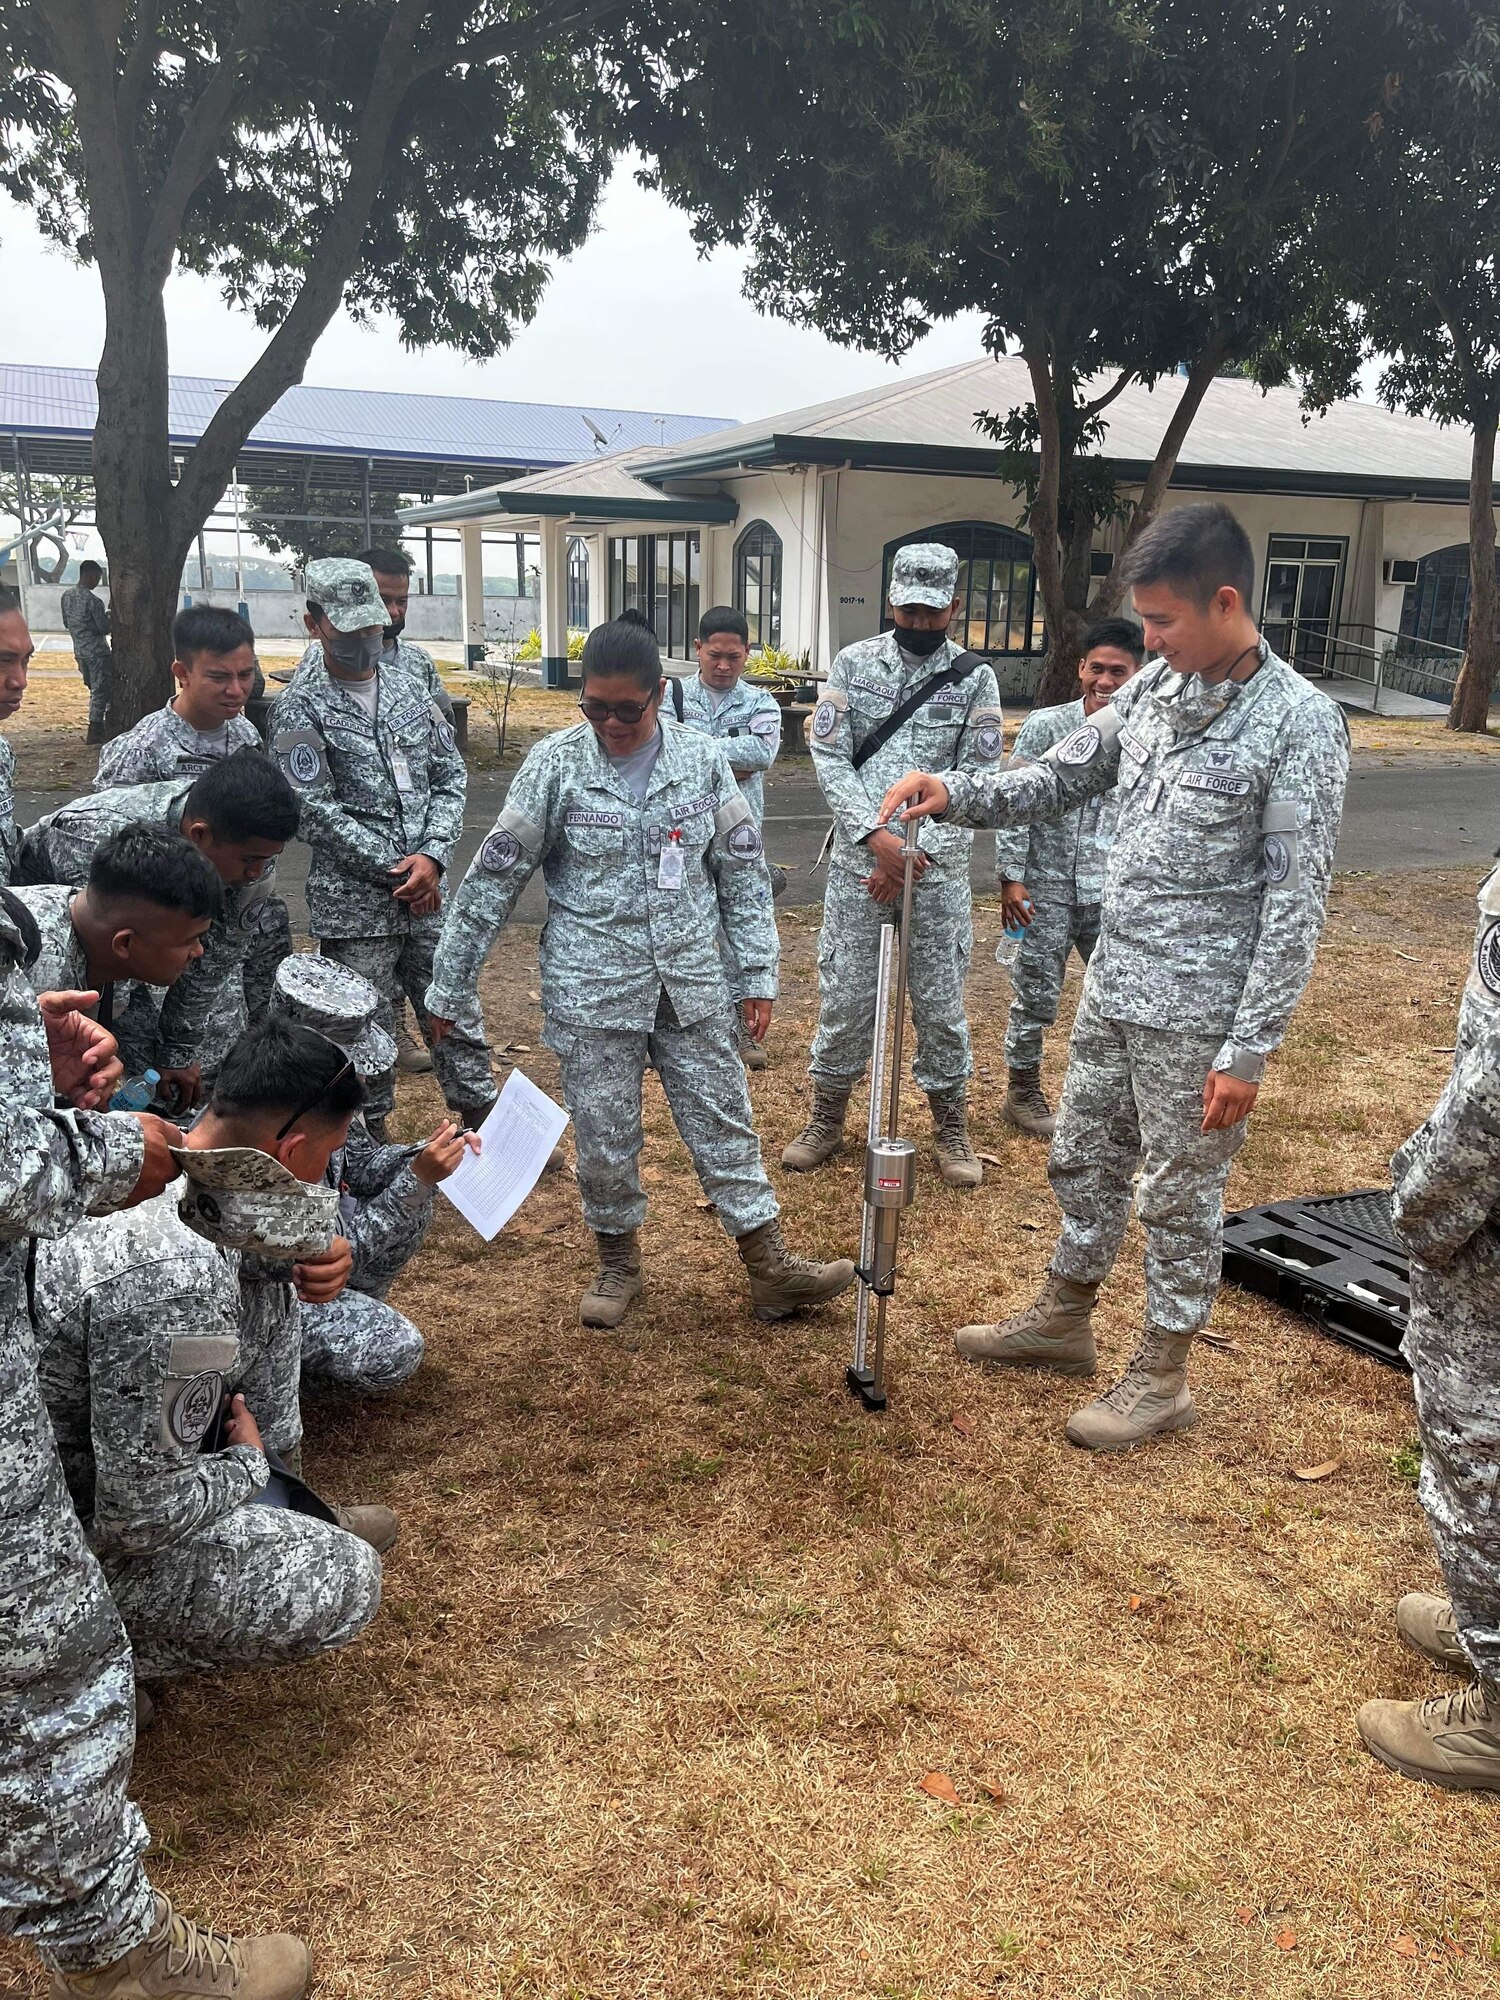 Philippine air force members with the 355th Aviation Engineer Wing demonstrate the use of a dynamic cone penetrometer during a subject matter expert exchange with the with the 18th Civil Engineer Group in the Philippines, Apr 12, 2023. The SME exchange event allowed members of the 18th Wing’s 18th CEG and PAF 355th AEW to share techniques and procedures on airfield damage repair. (Courtesy photo from Philippine air force public affairs)